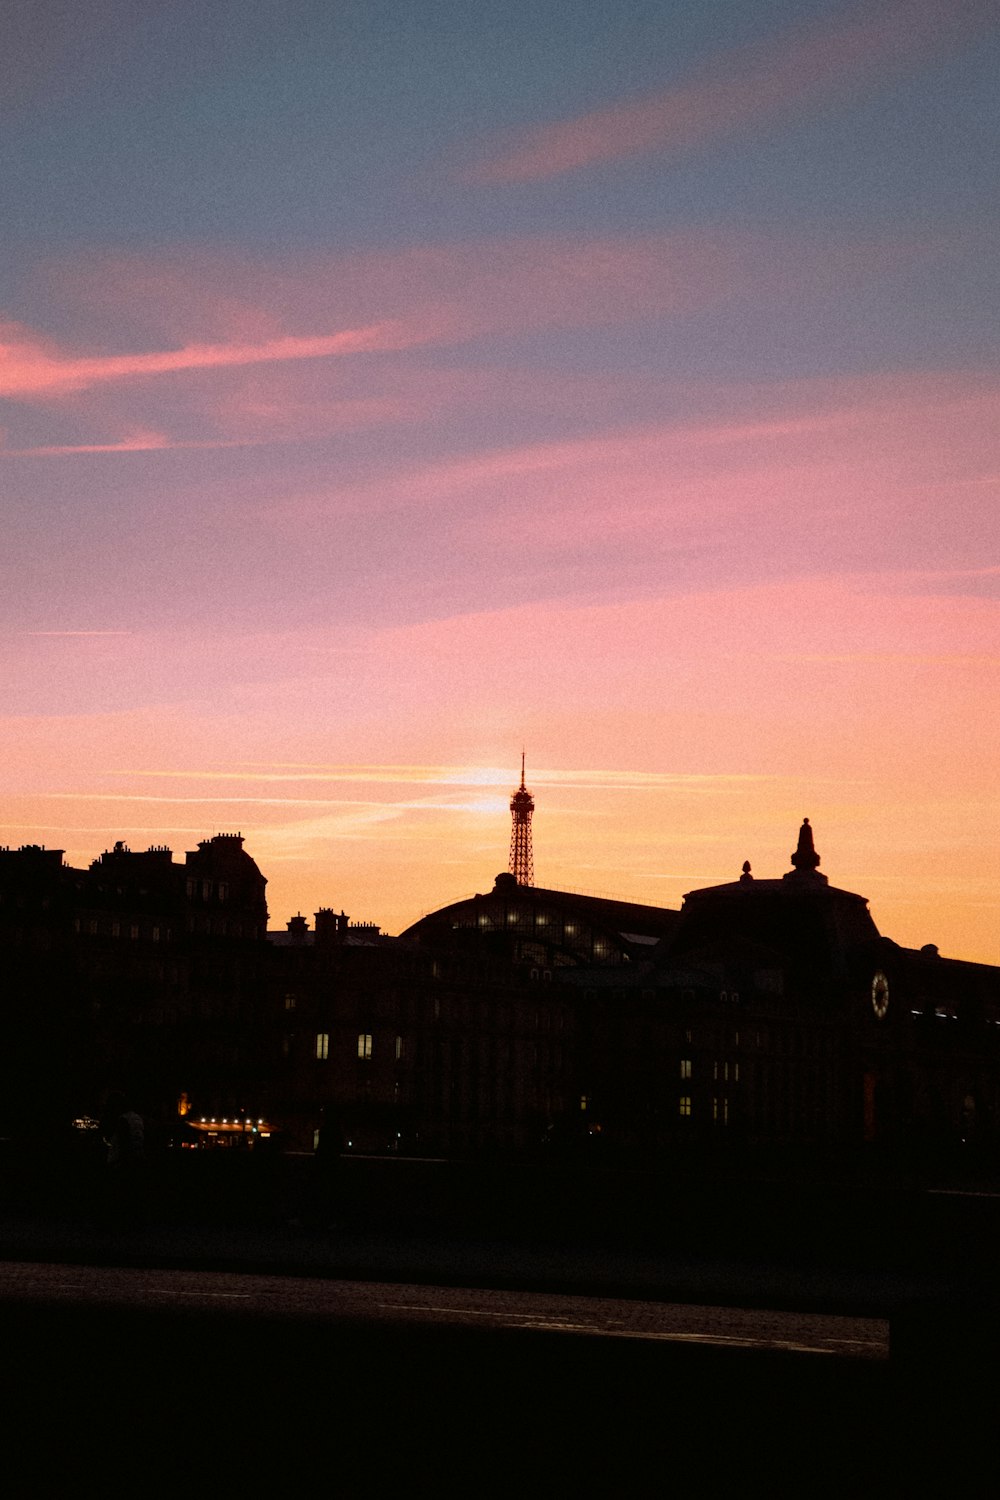 a sunset view of a city with a clock tower in the distance